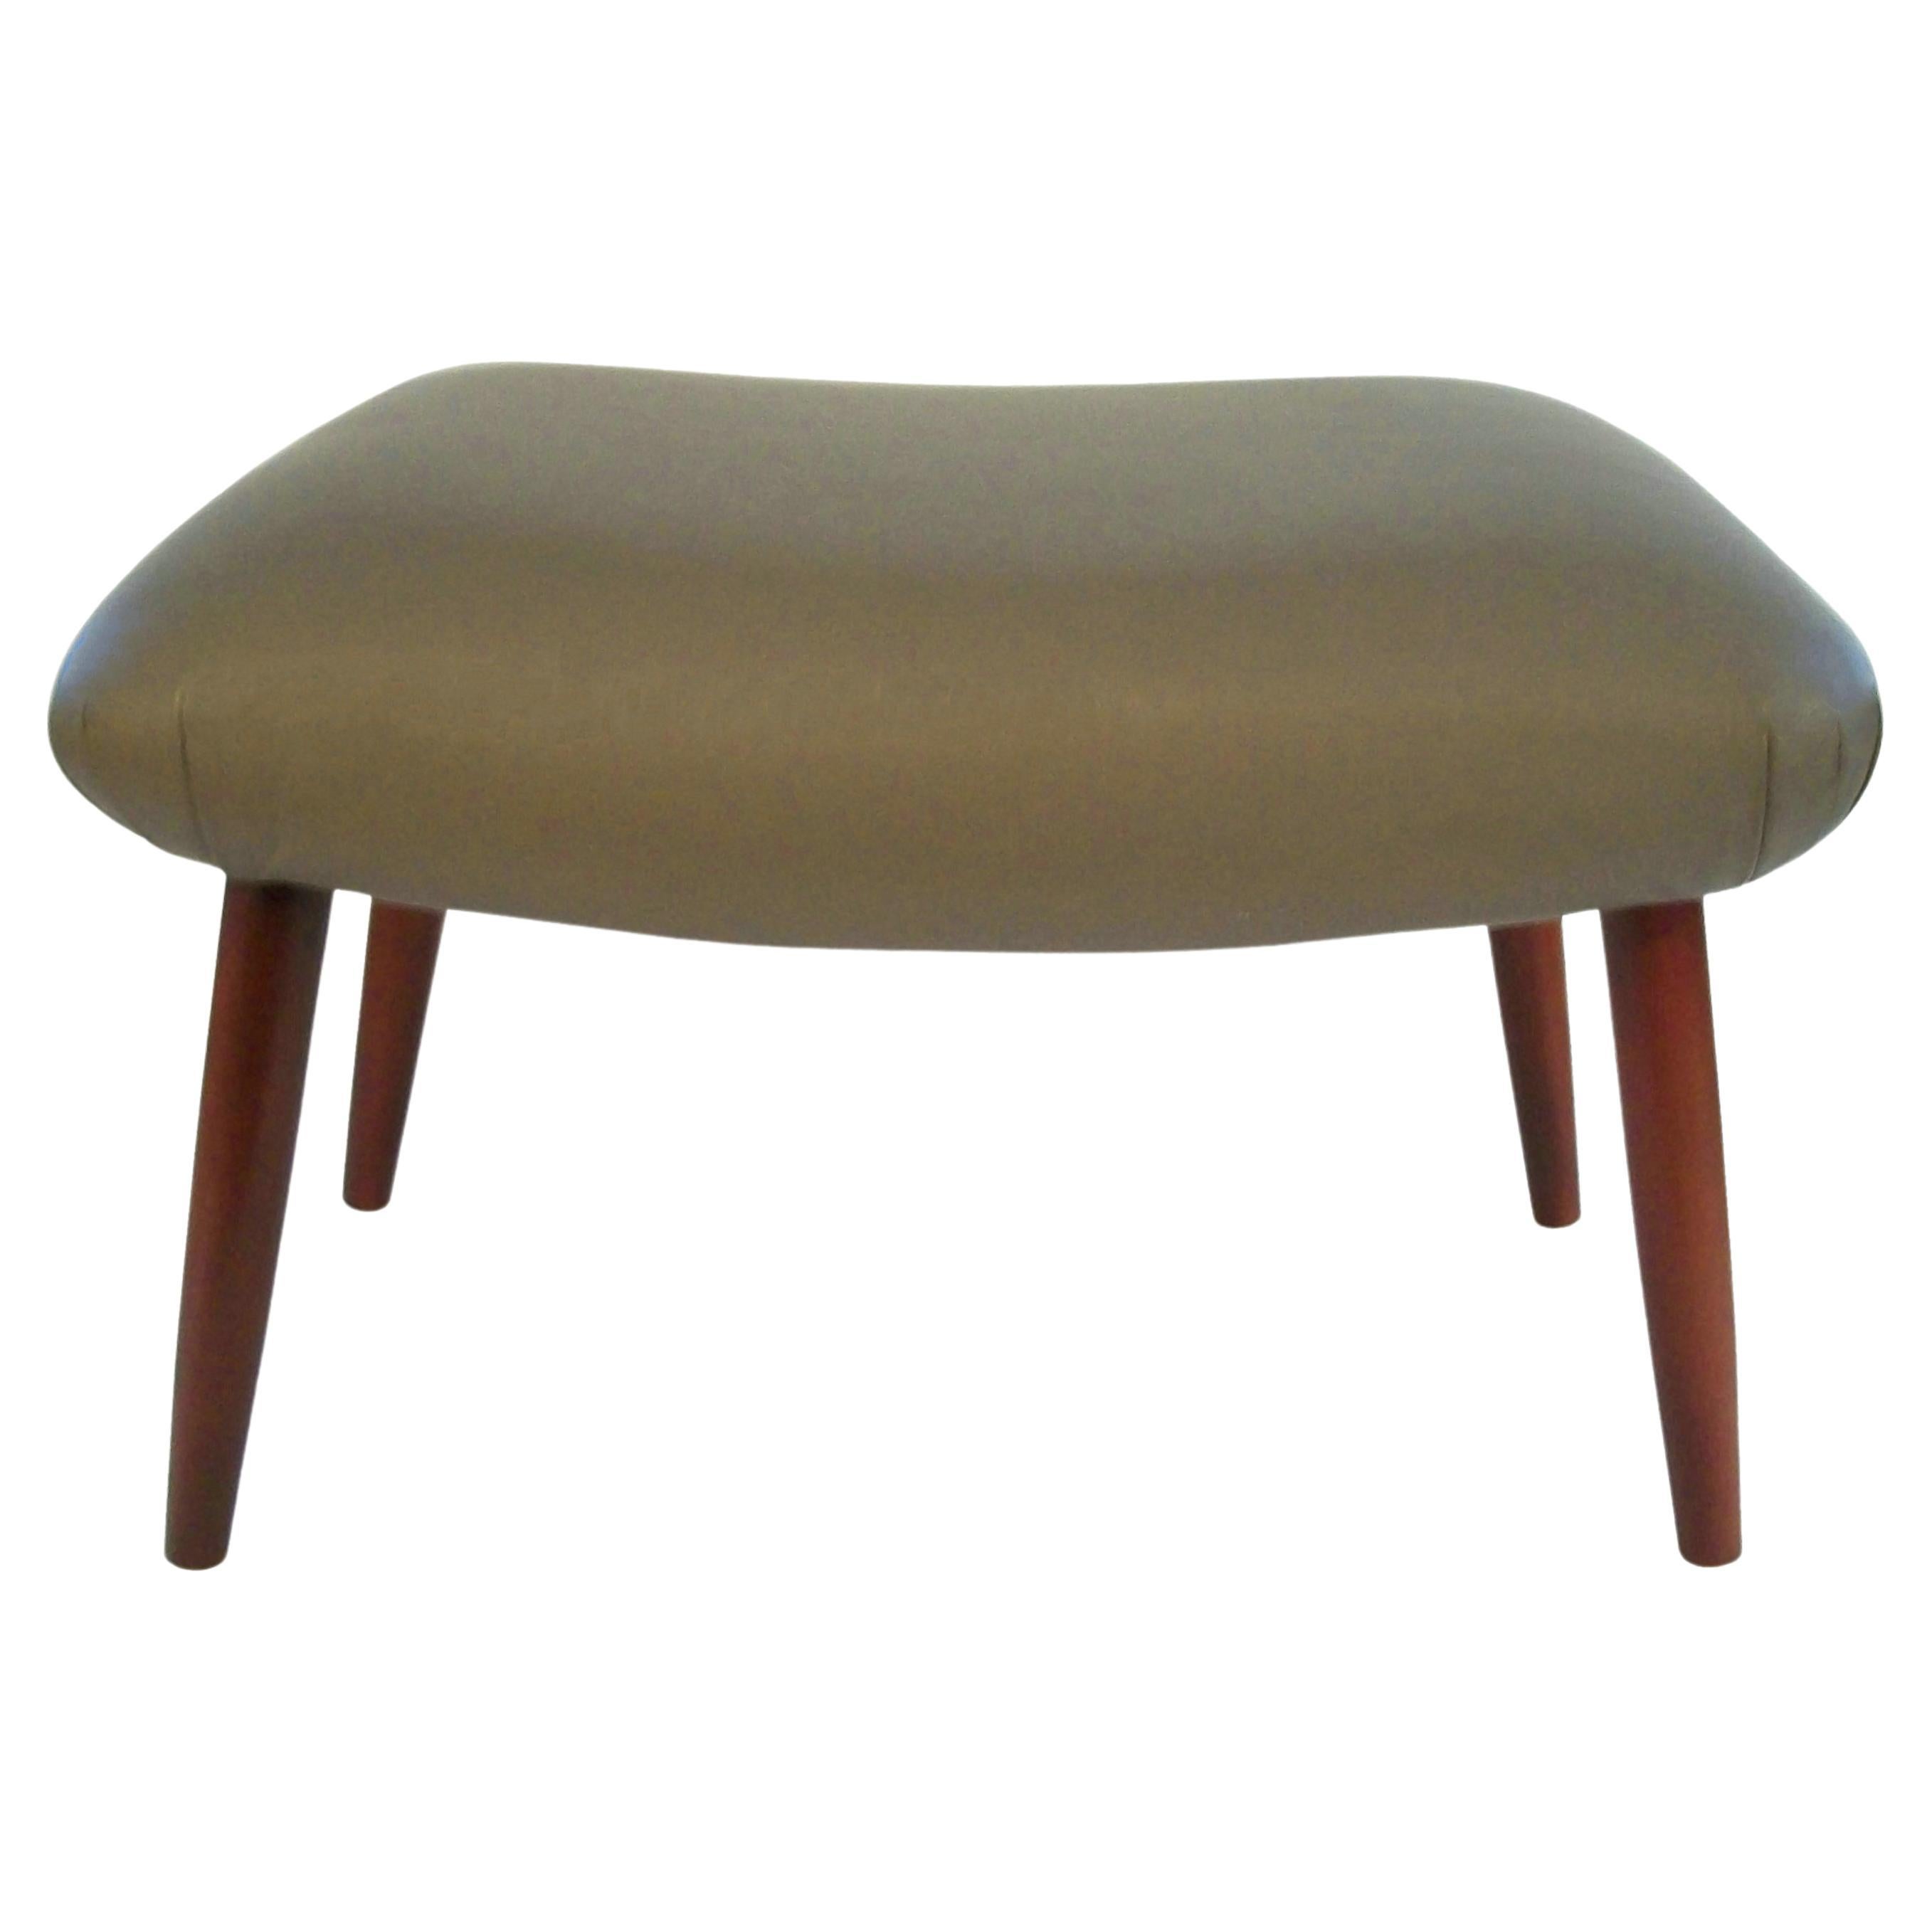 Mid Century Saddle Seat Foot Stool / Ottoman - Leather Upholstery - Circa 1980's For Sale